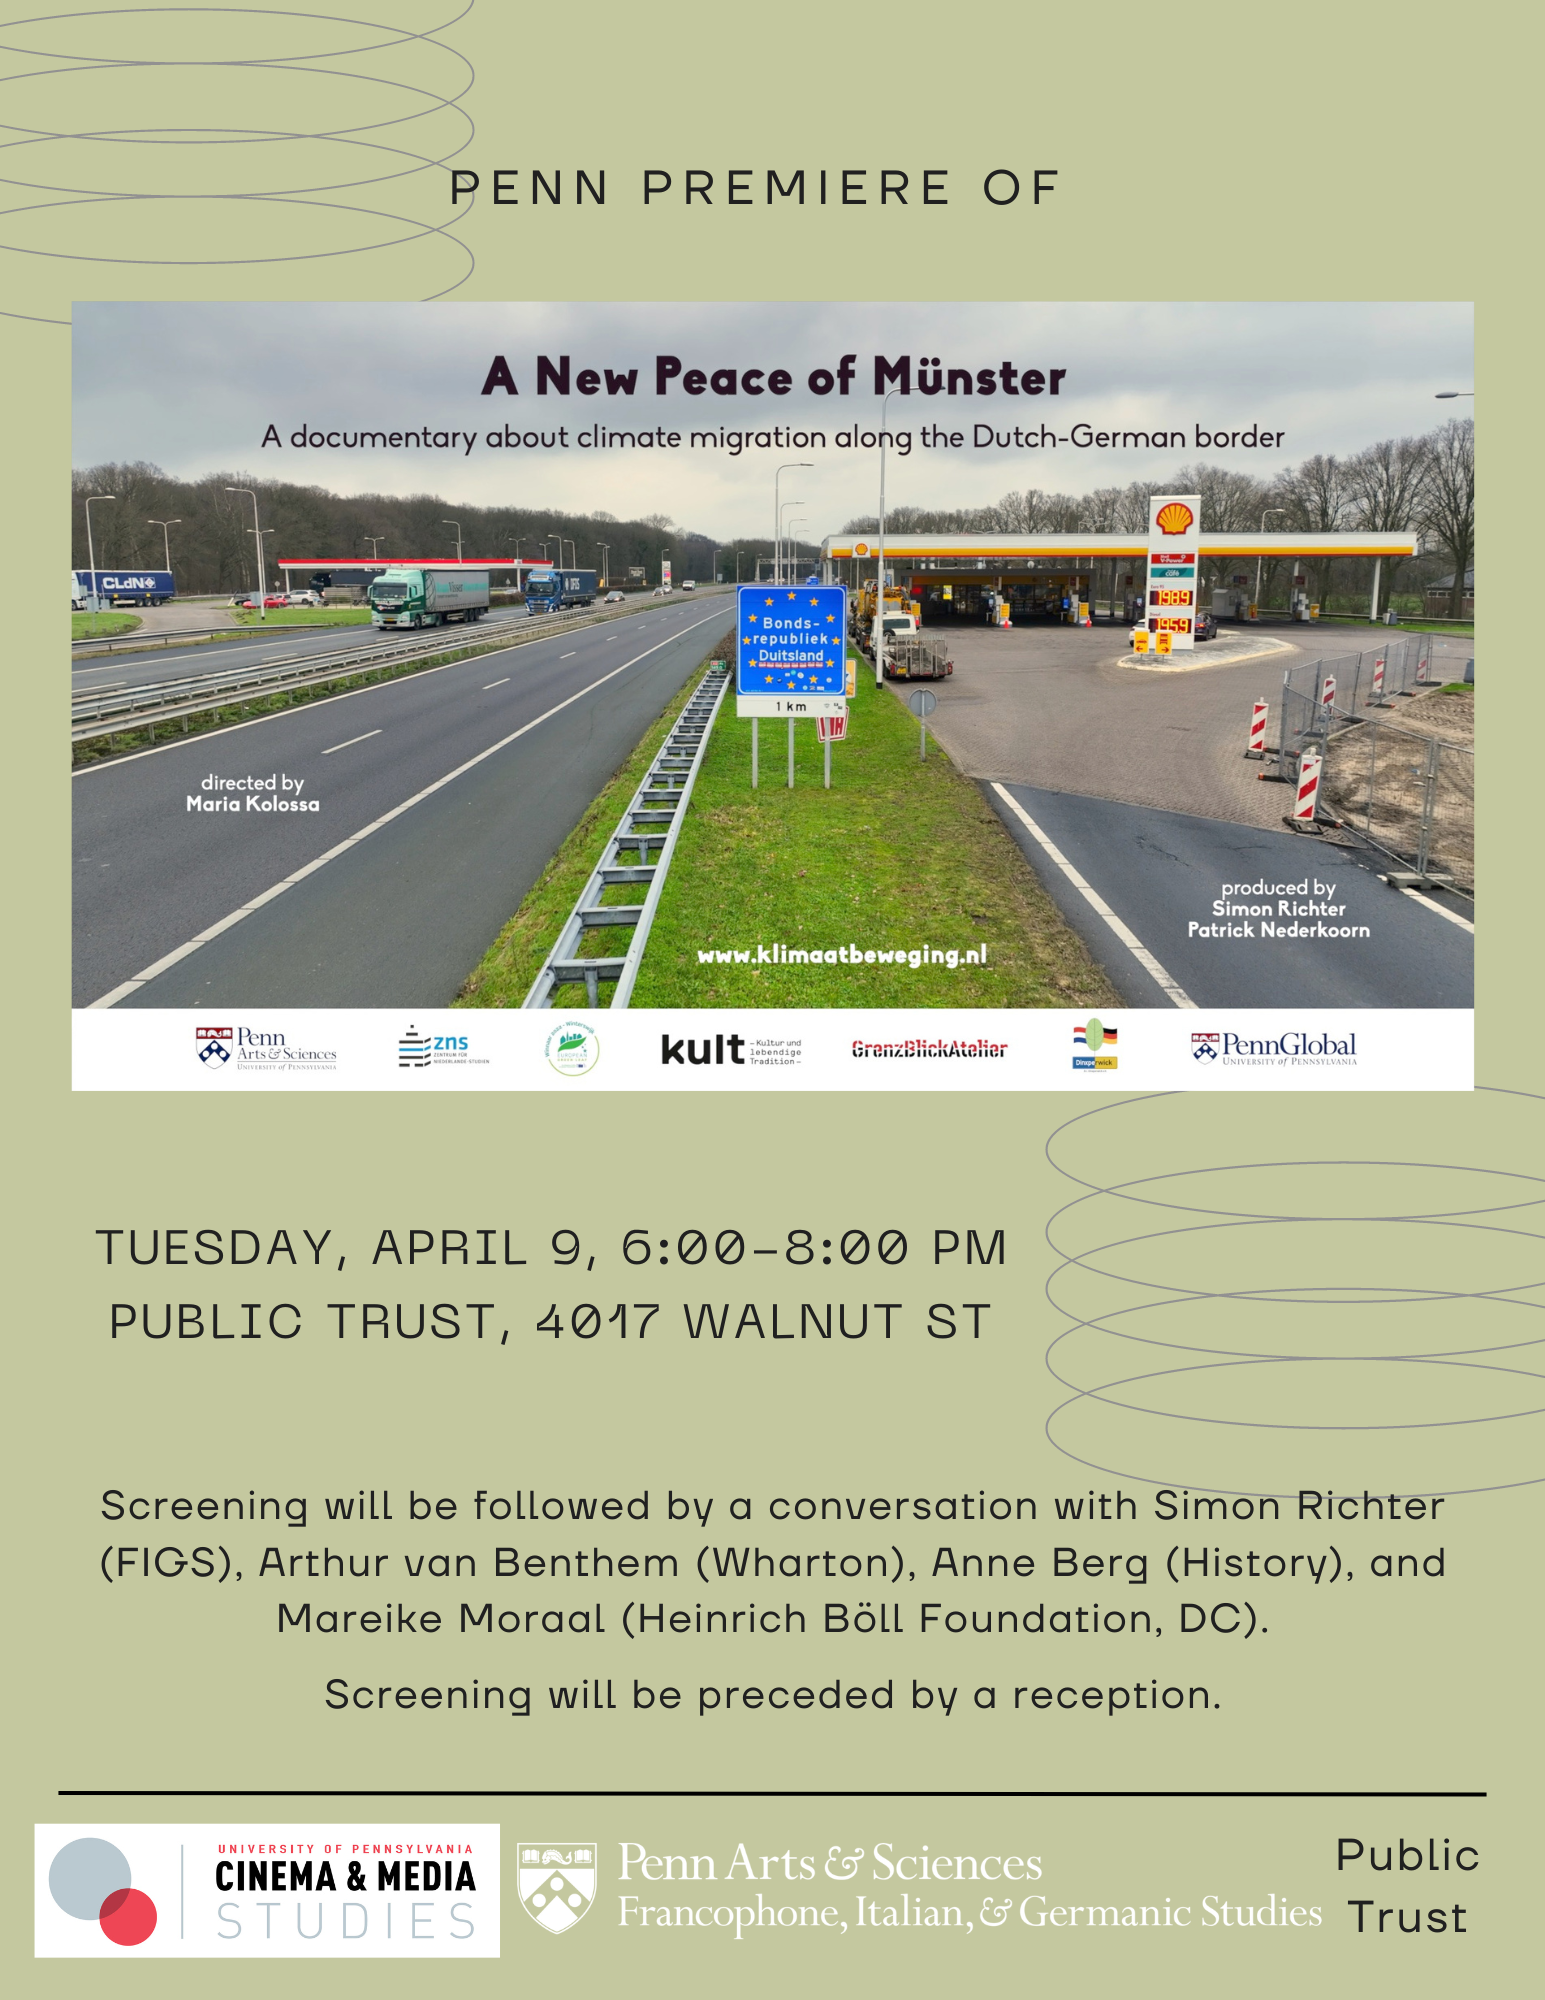 A New Peace of Munster event poster